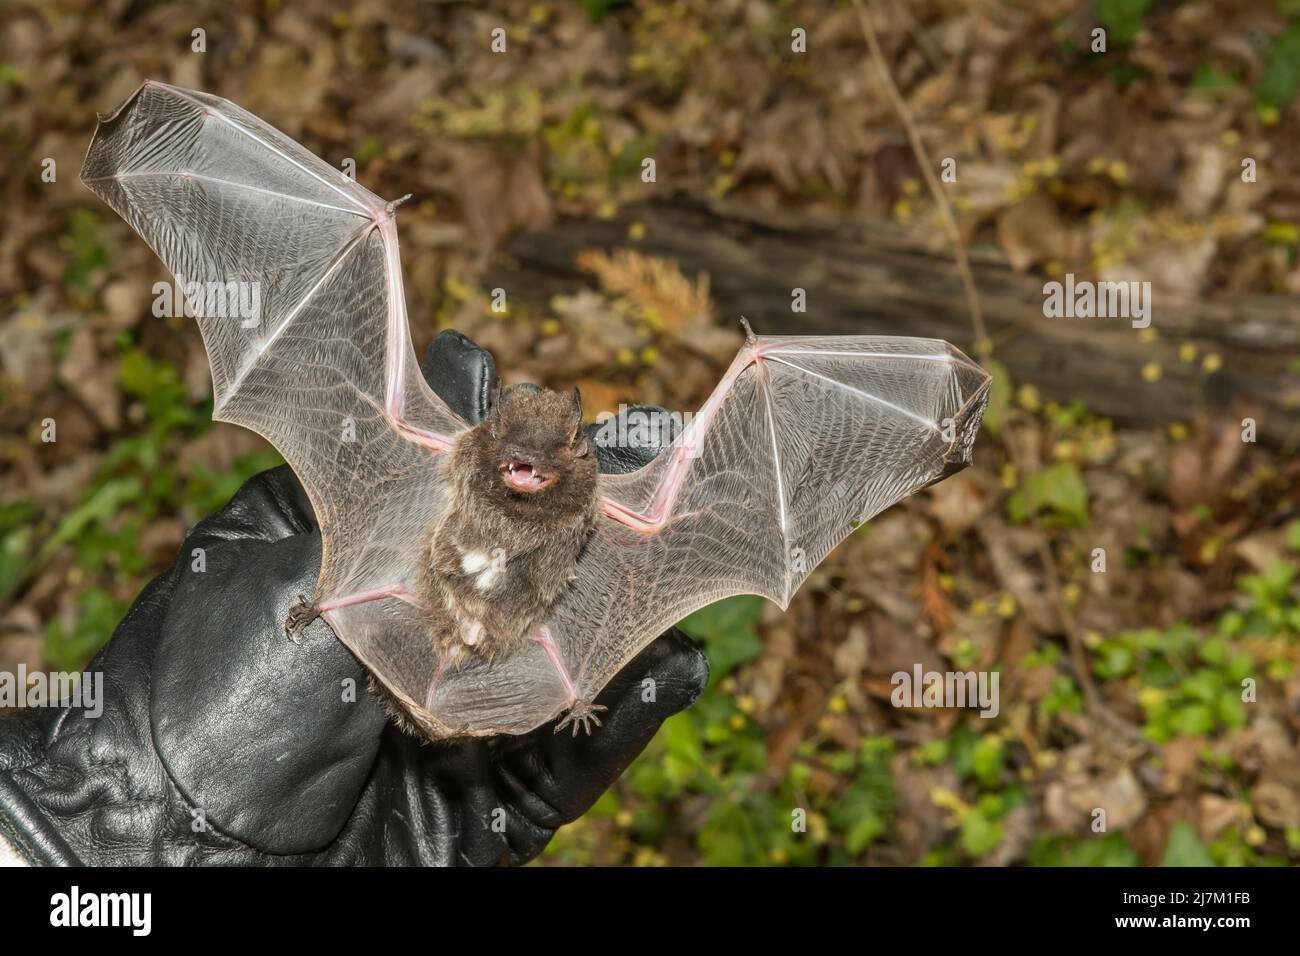 silver haired bat flying